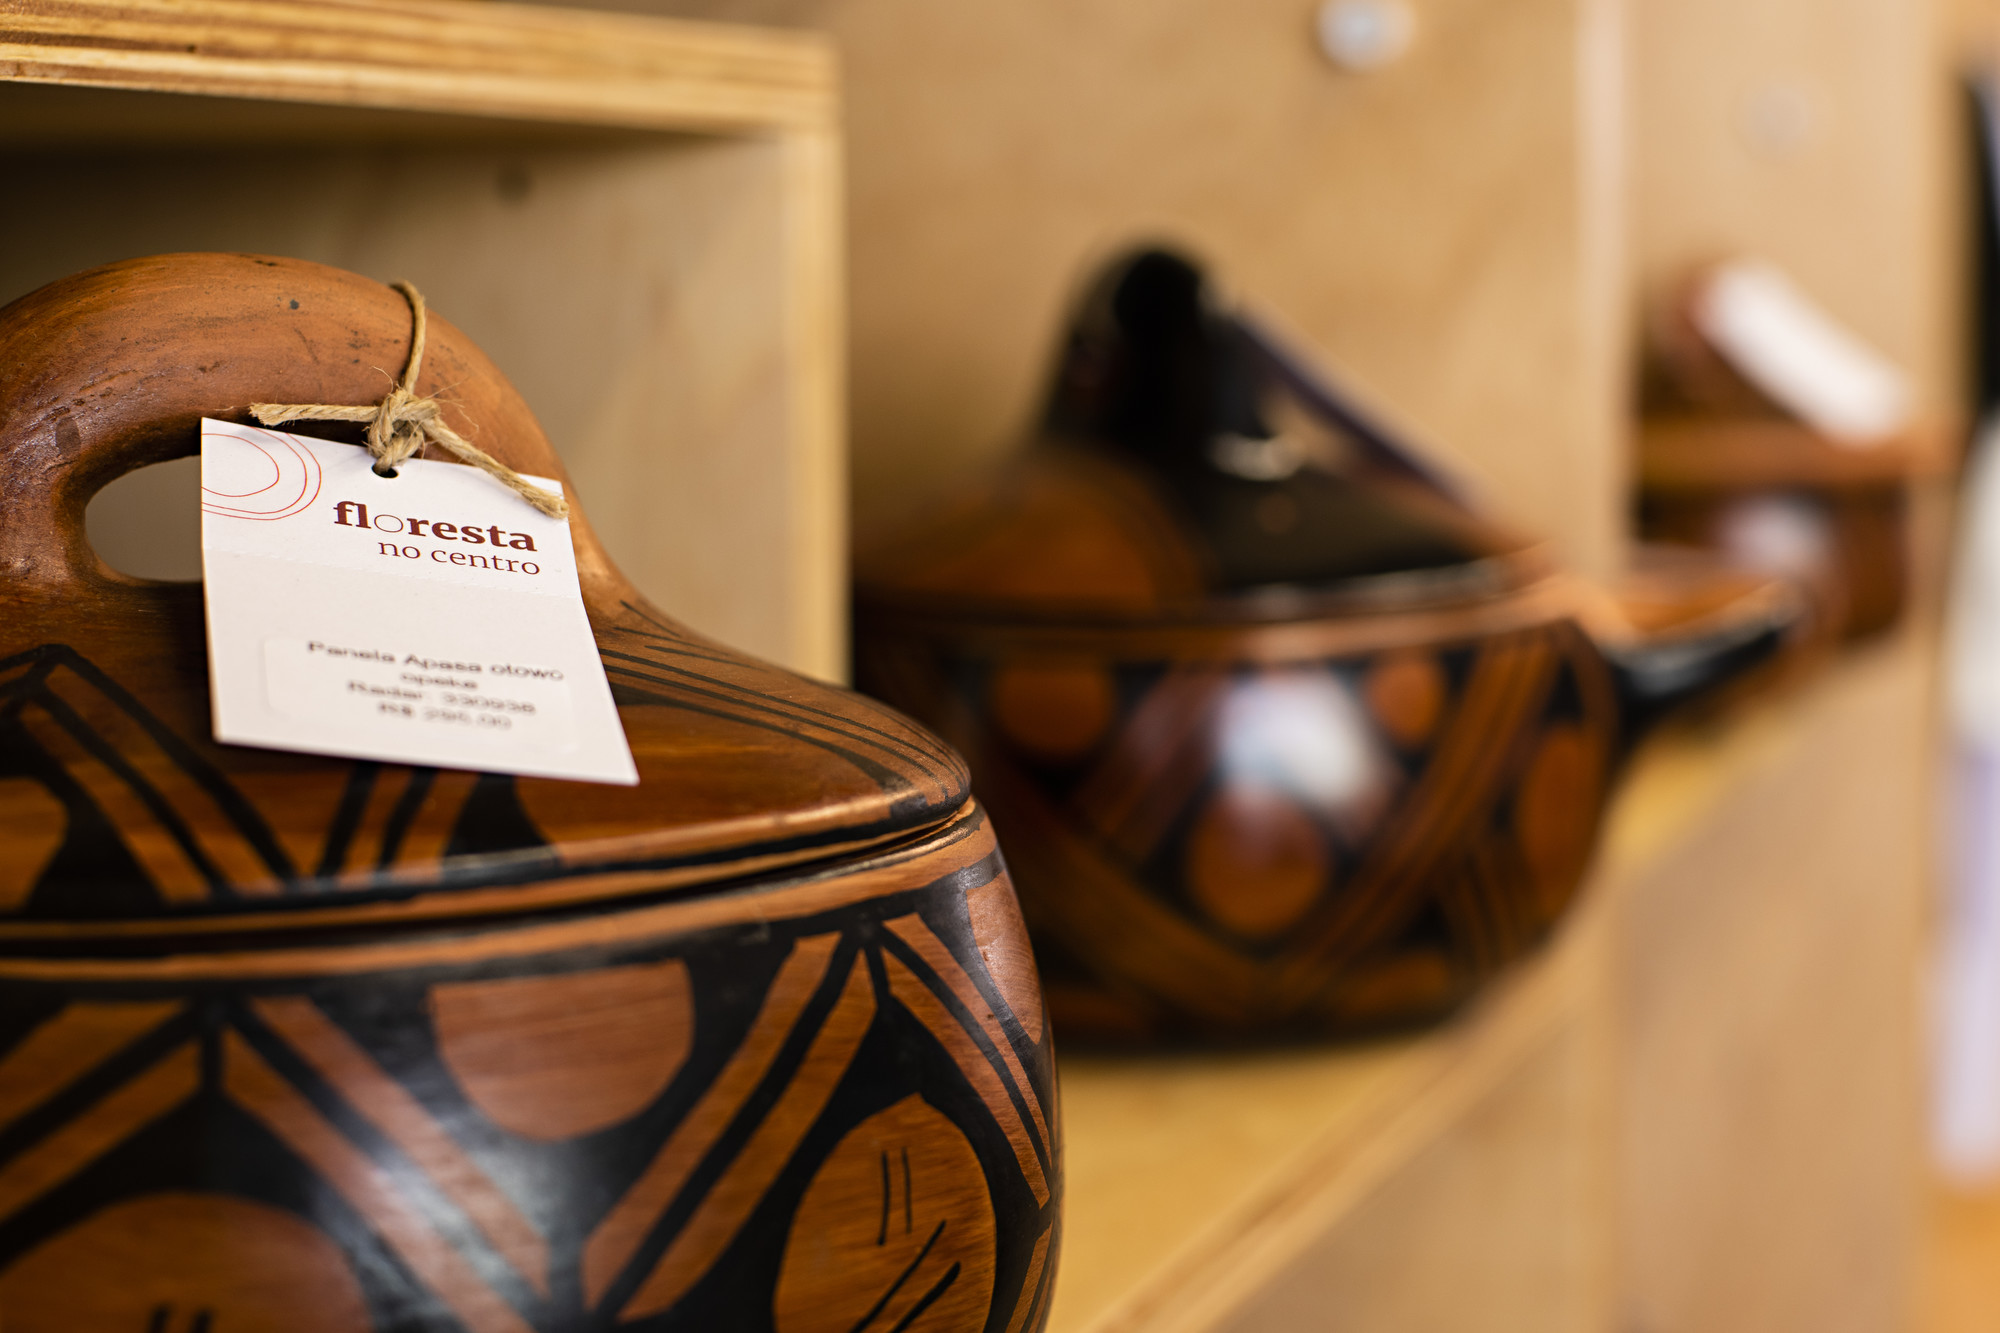 Handcrafted Xingu pots on display at the Floresta store in the Center | Claudio Tavares/ISA